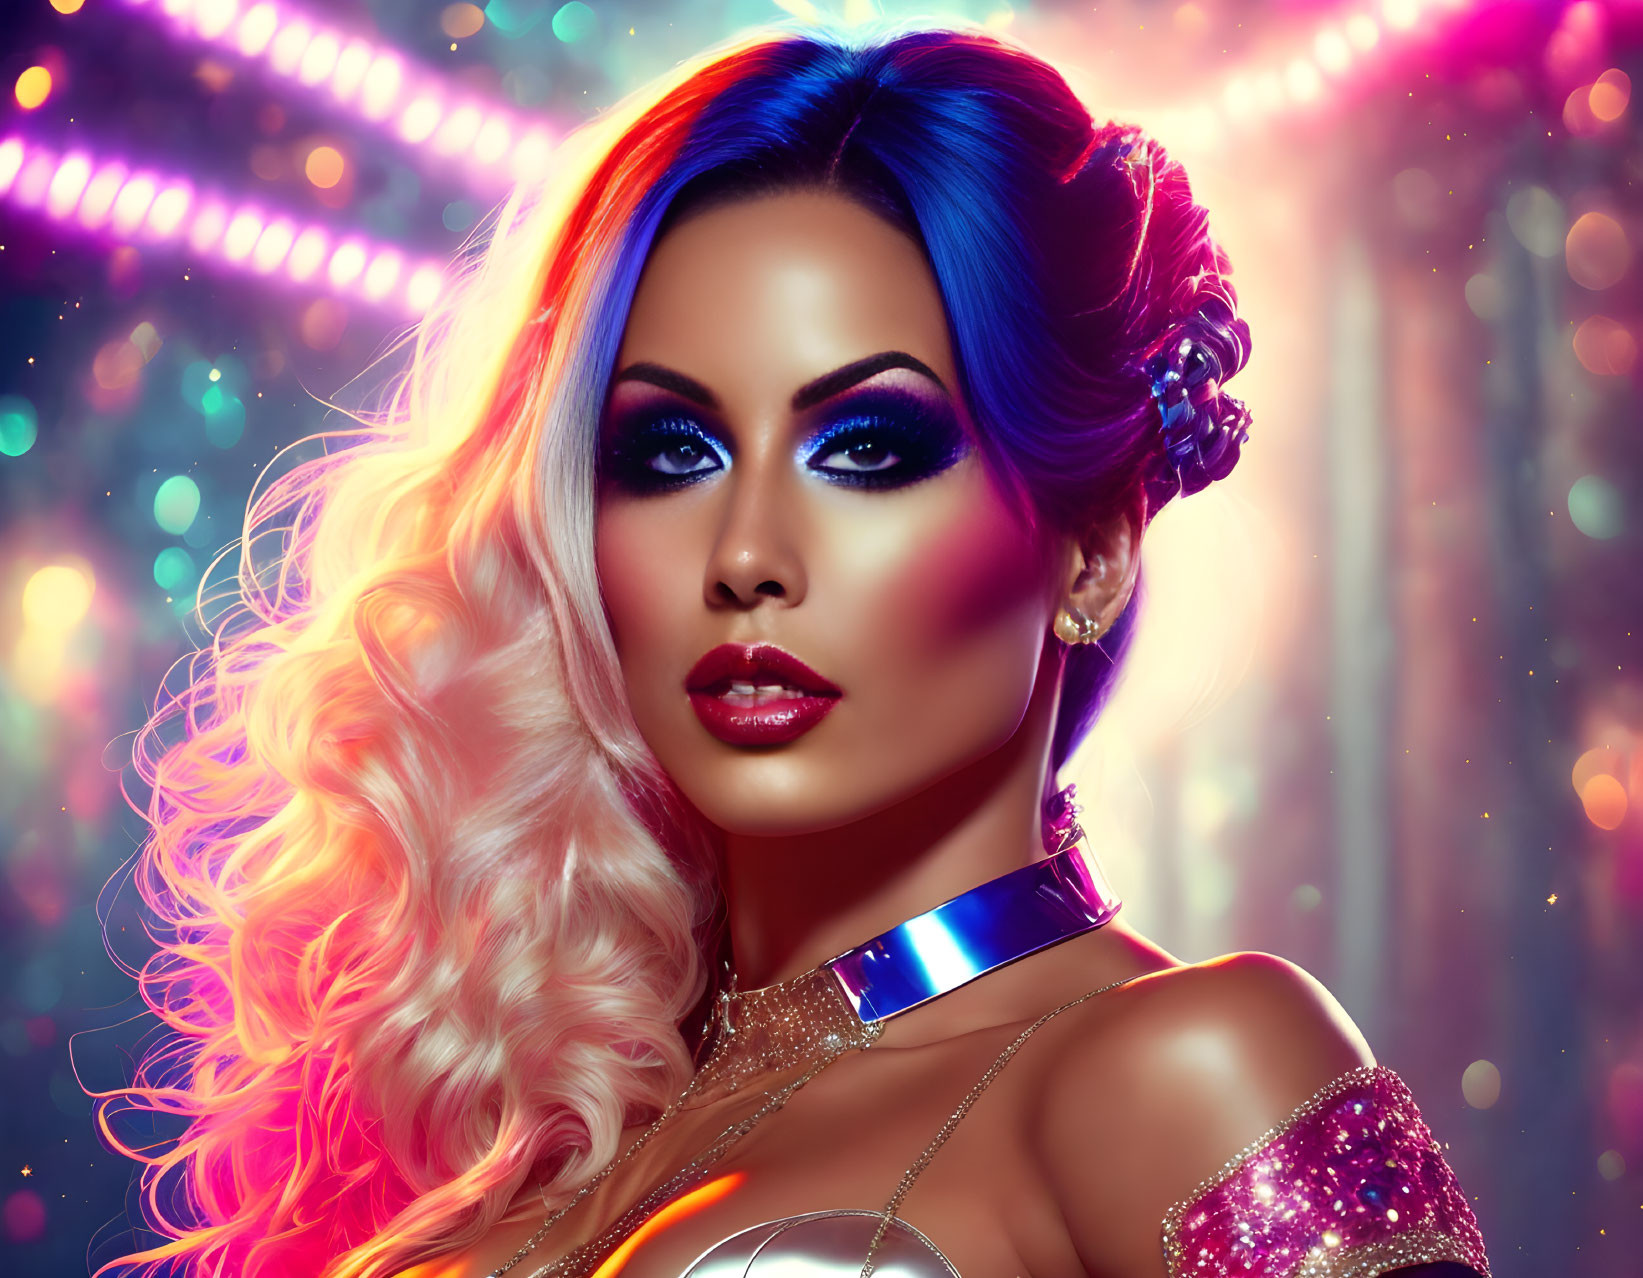 Blonde woman with blue makeup and pink attire in vibrant background